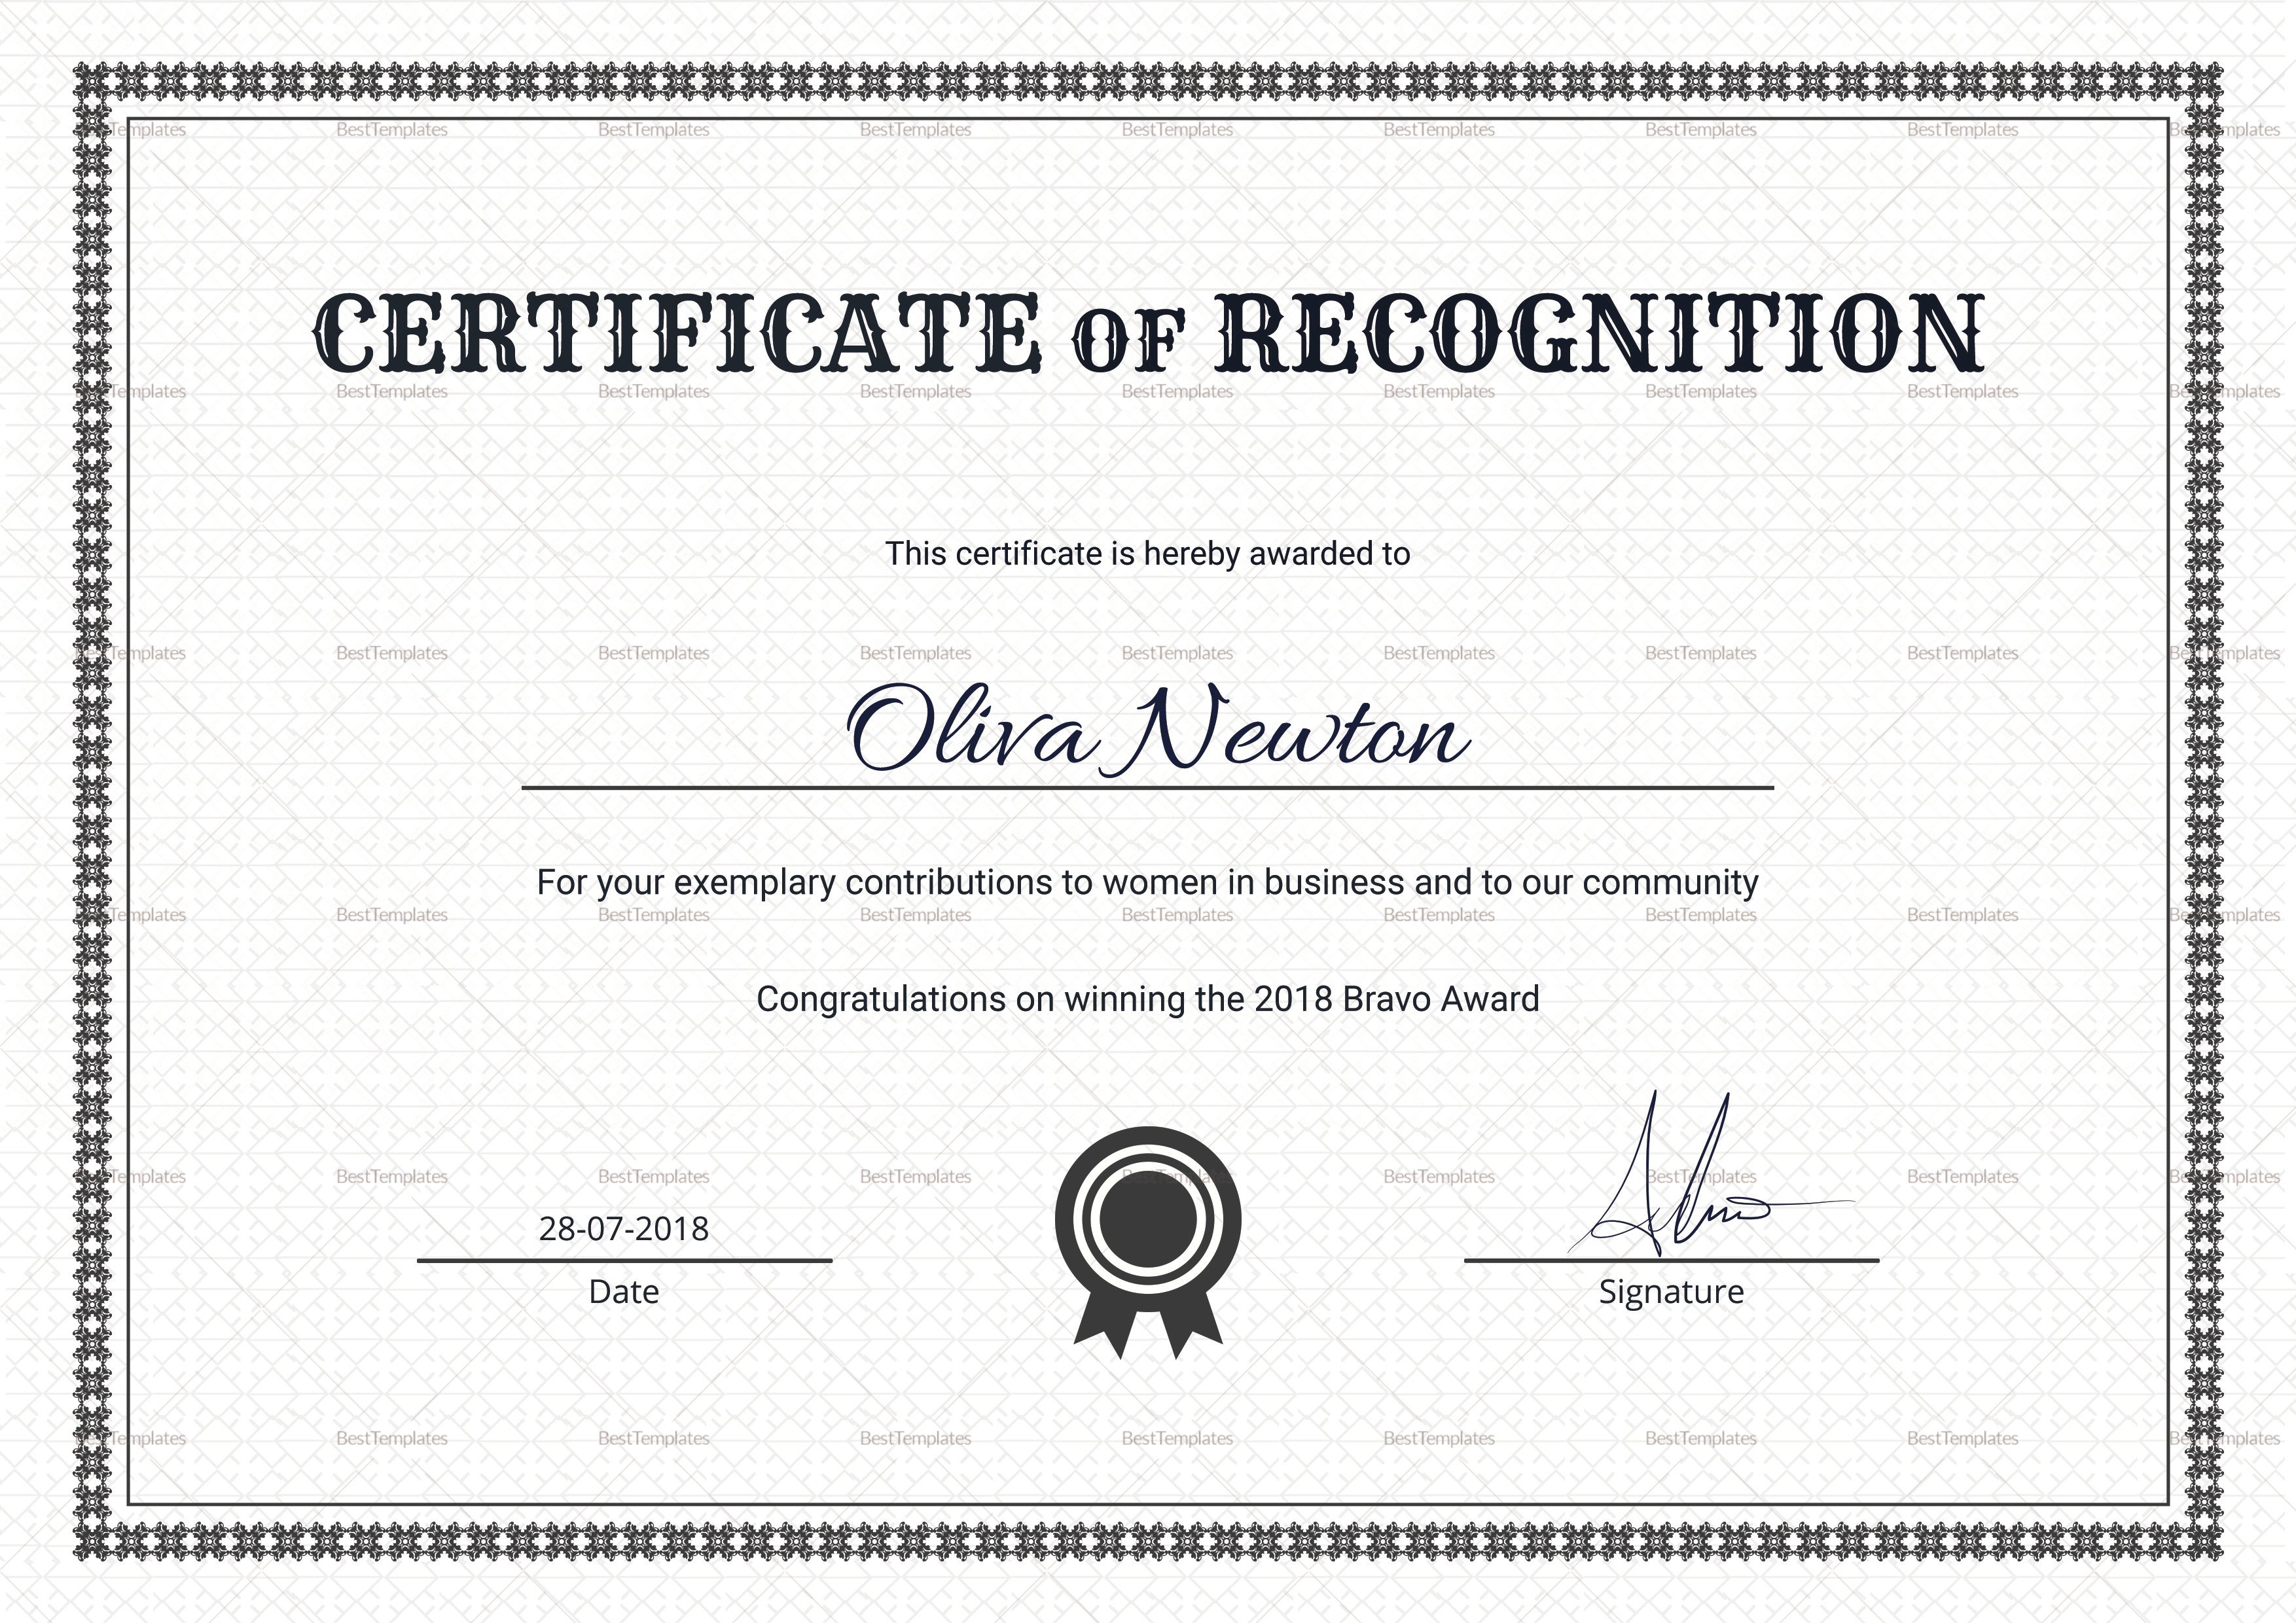 Certificate Of Recognition Template Word Simple Certificate Of Recognition Design Template In Psd Word